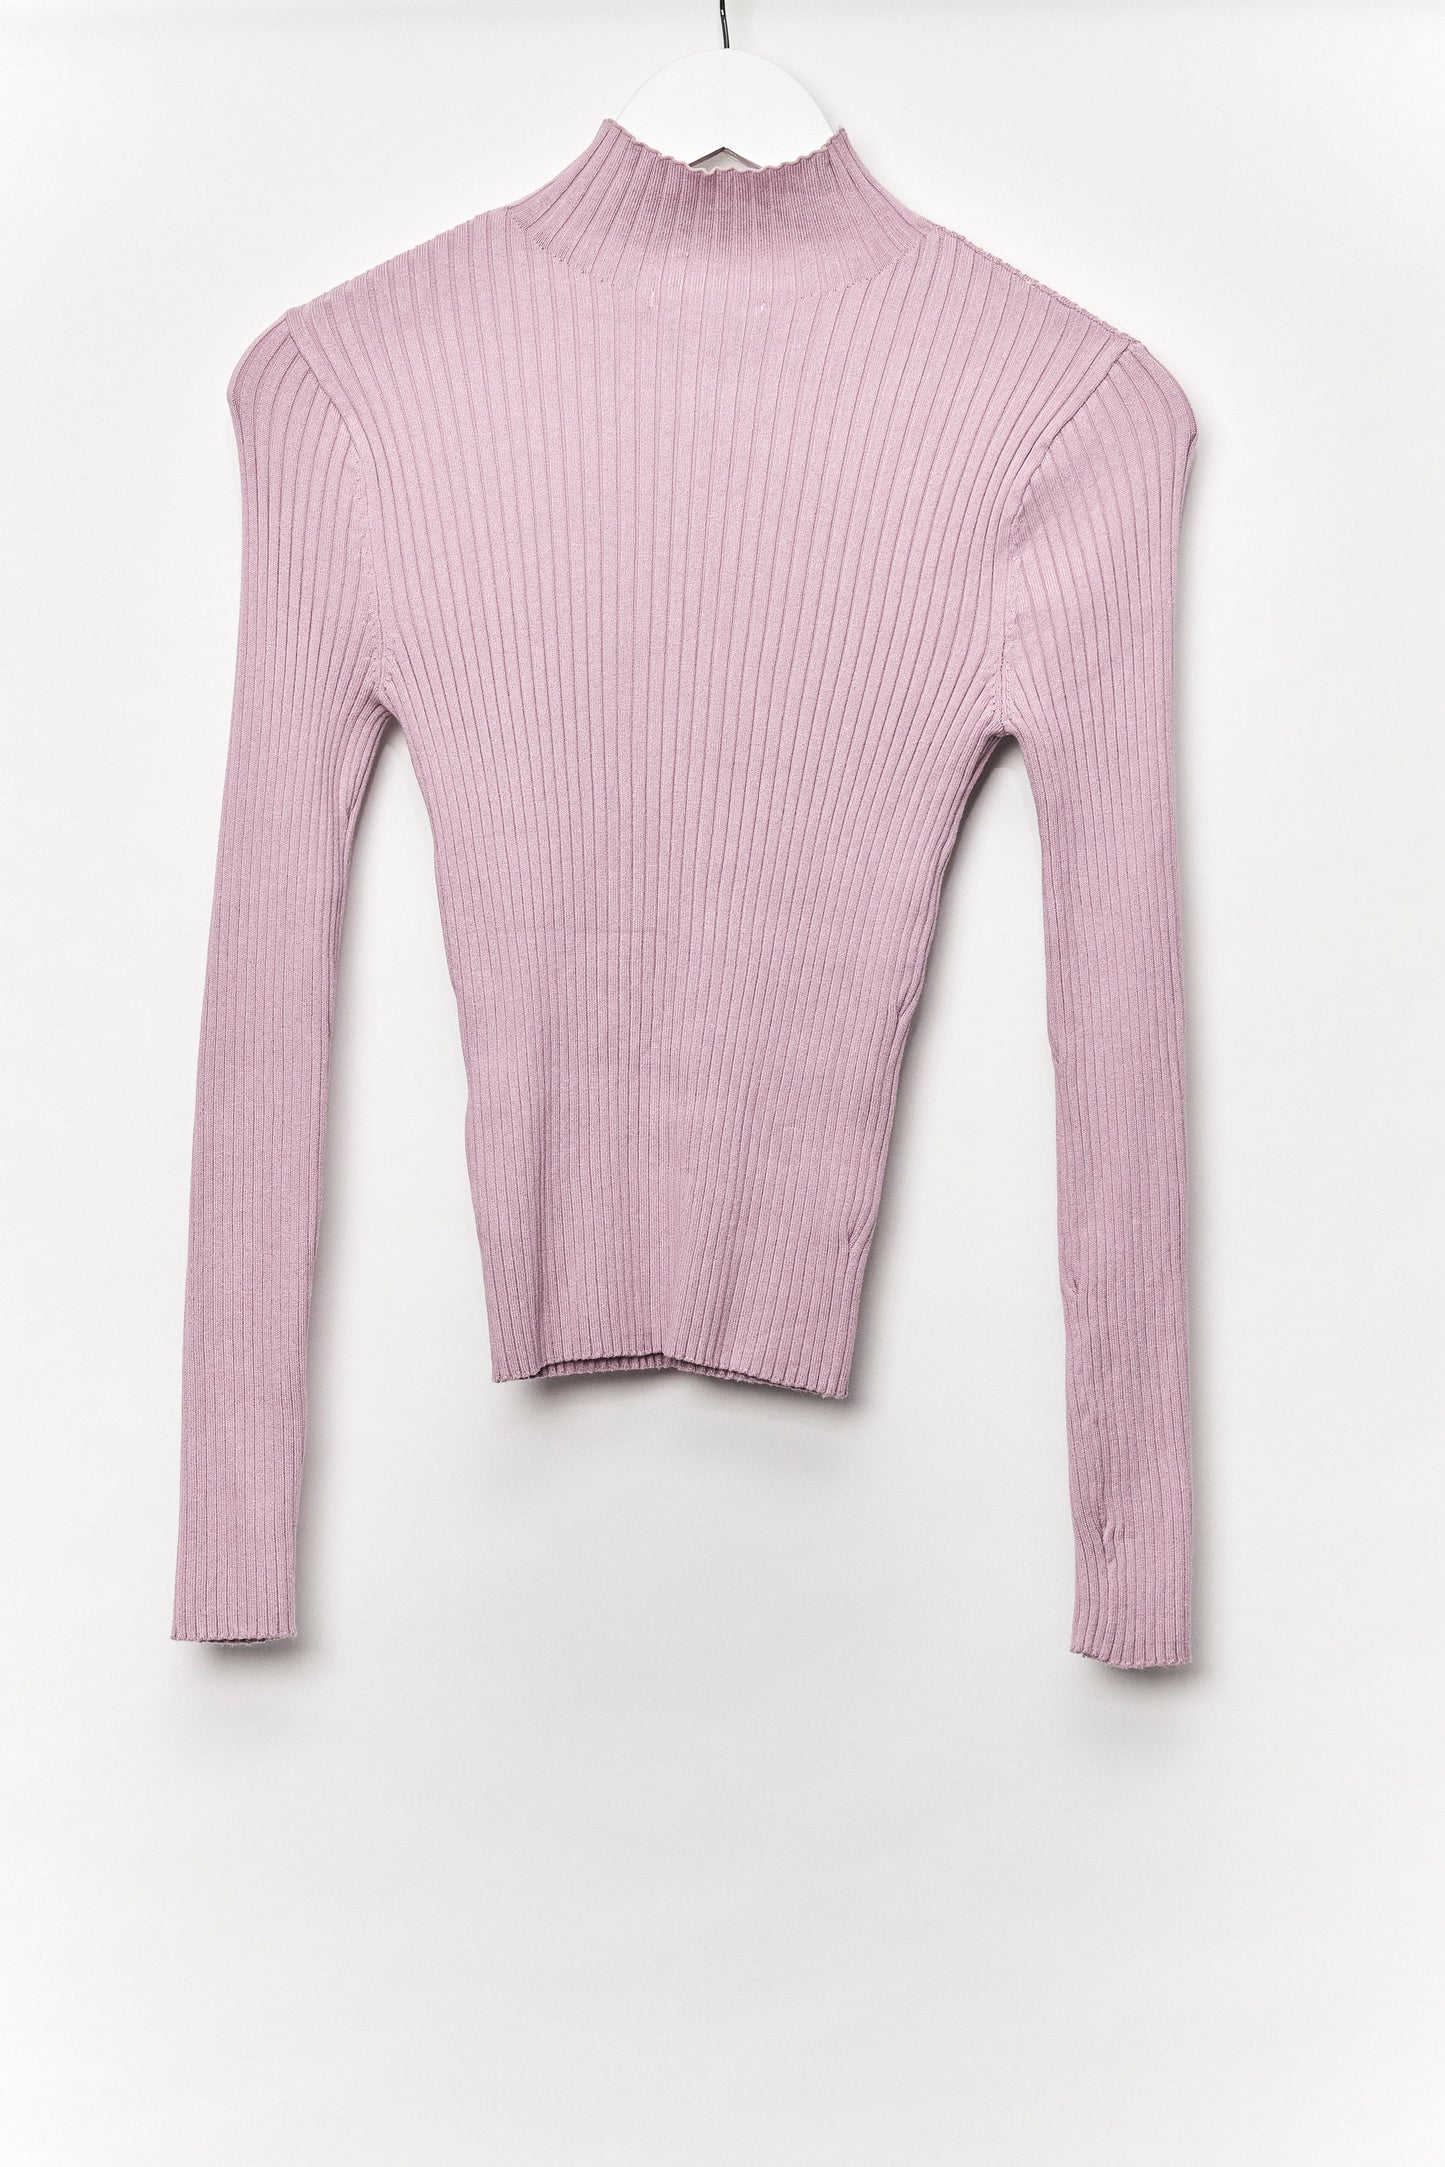 Womens Pink Ribbed Turtle neck sweater Size Small